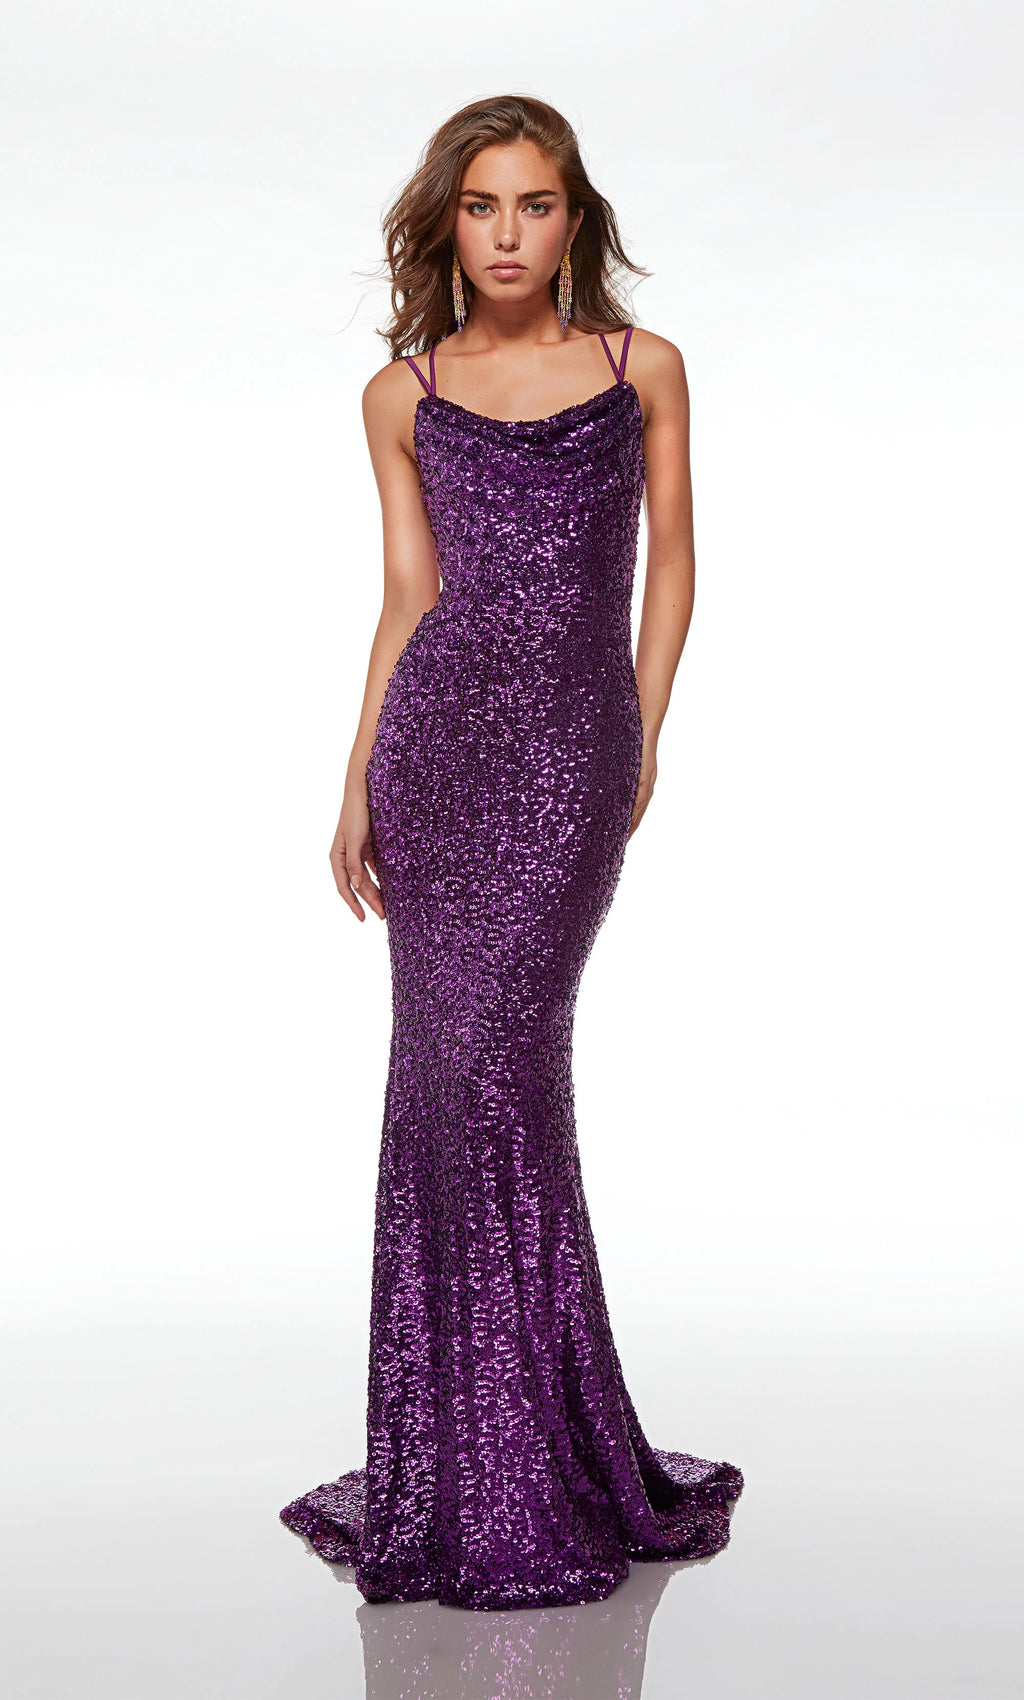 Sparkle in this fully sequined Alyce Paris dress 61626, an ideal choice for your senior prom. Showcasing an edgy scoop neckline, lovely adjustable straps give this ensemble a sense of comfort and style. The slim fitted silhouette accentuates your curves highlighting your figure. The captivating open lace up back and elegant sweep train makes for an exquisite exit.